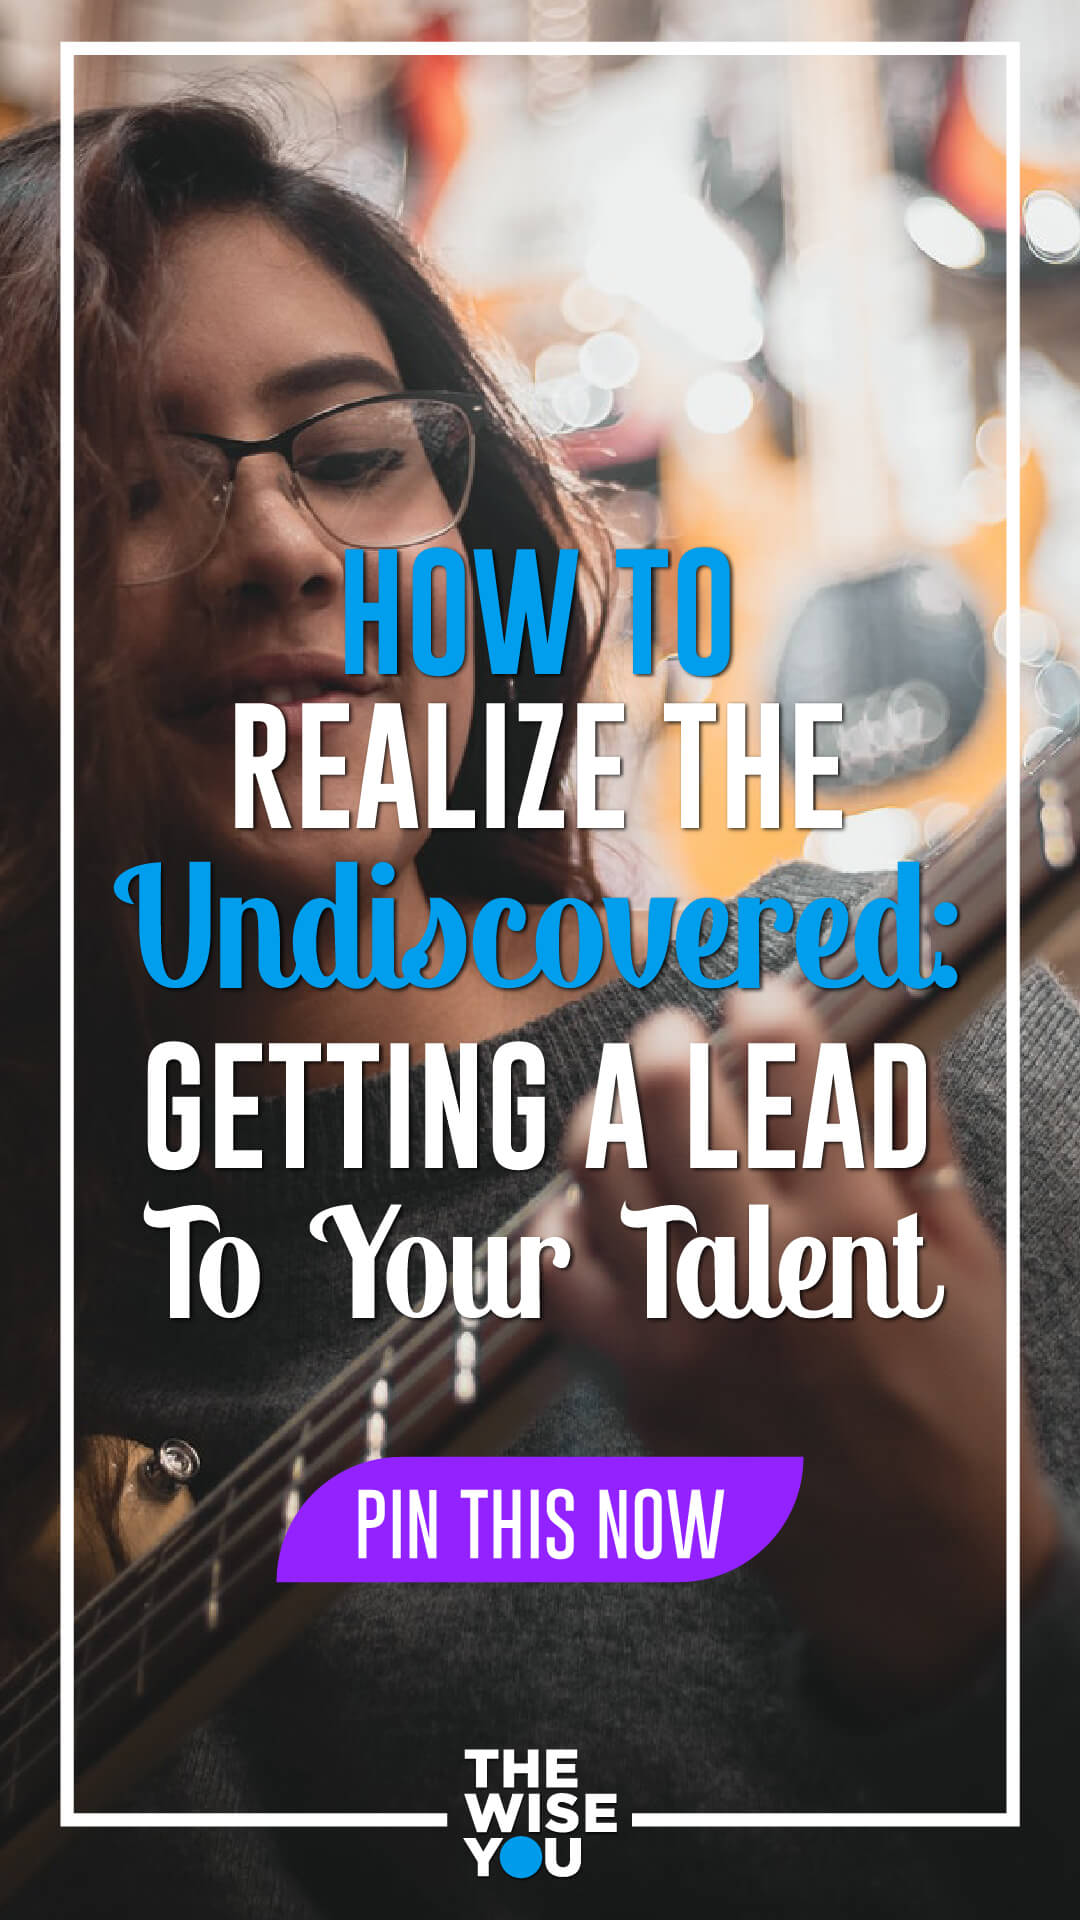 How To Realize The Undiscovered:  Getting A Lead To Your Talent